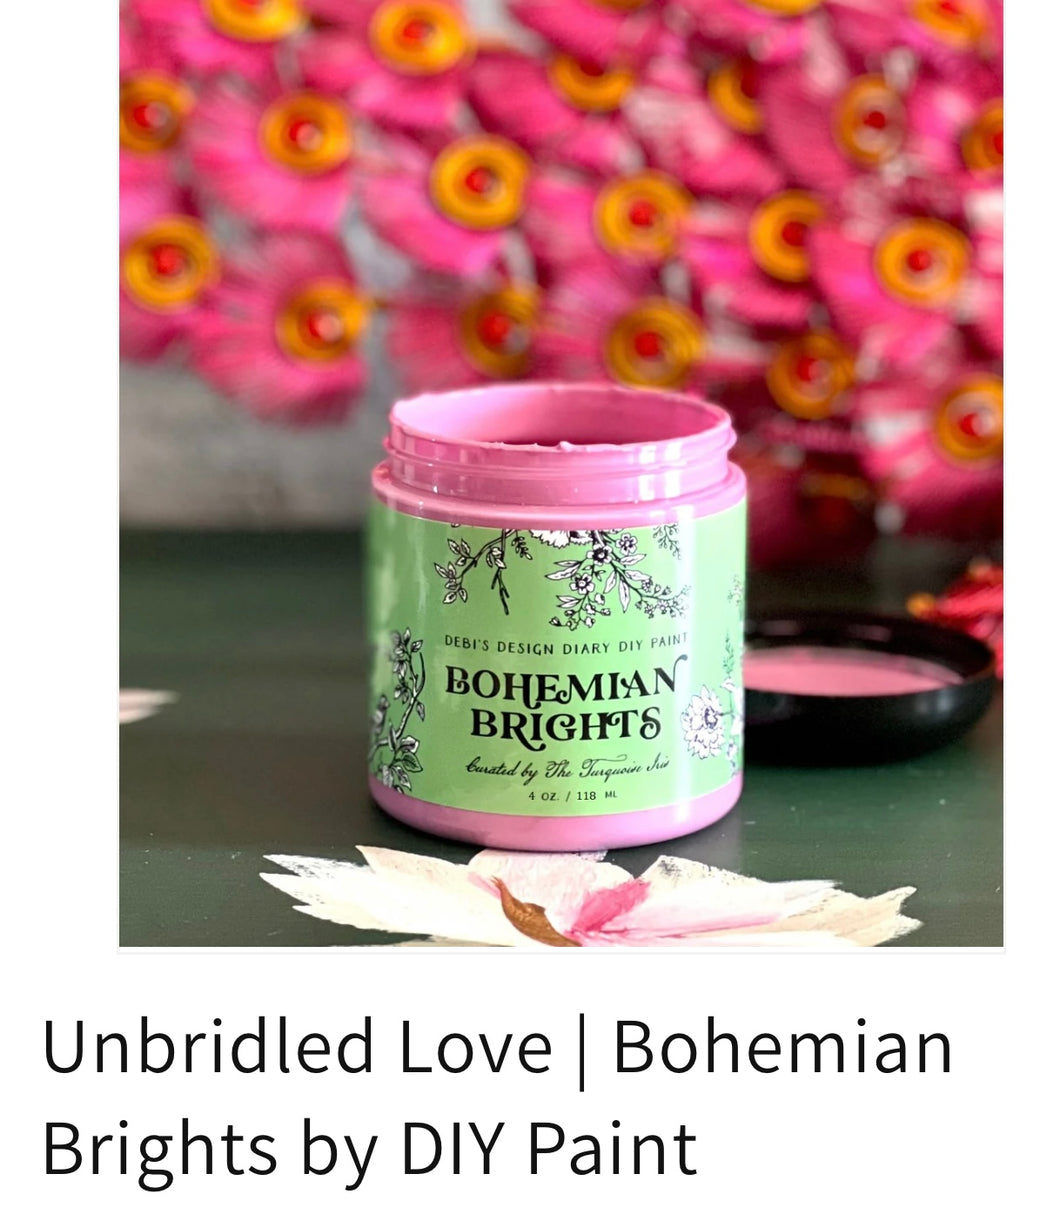 Bohemian Brights Unbridled Love